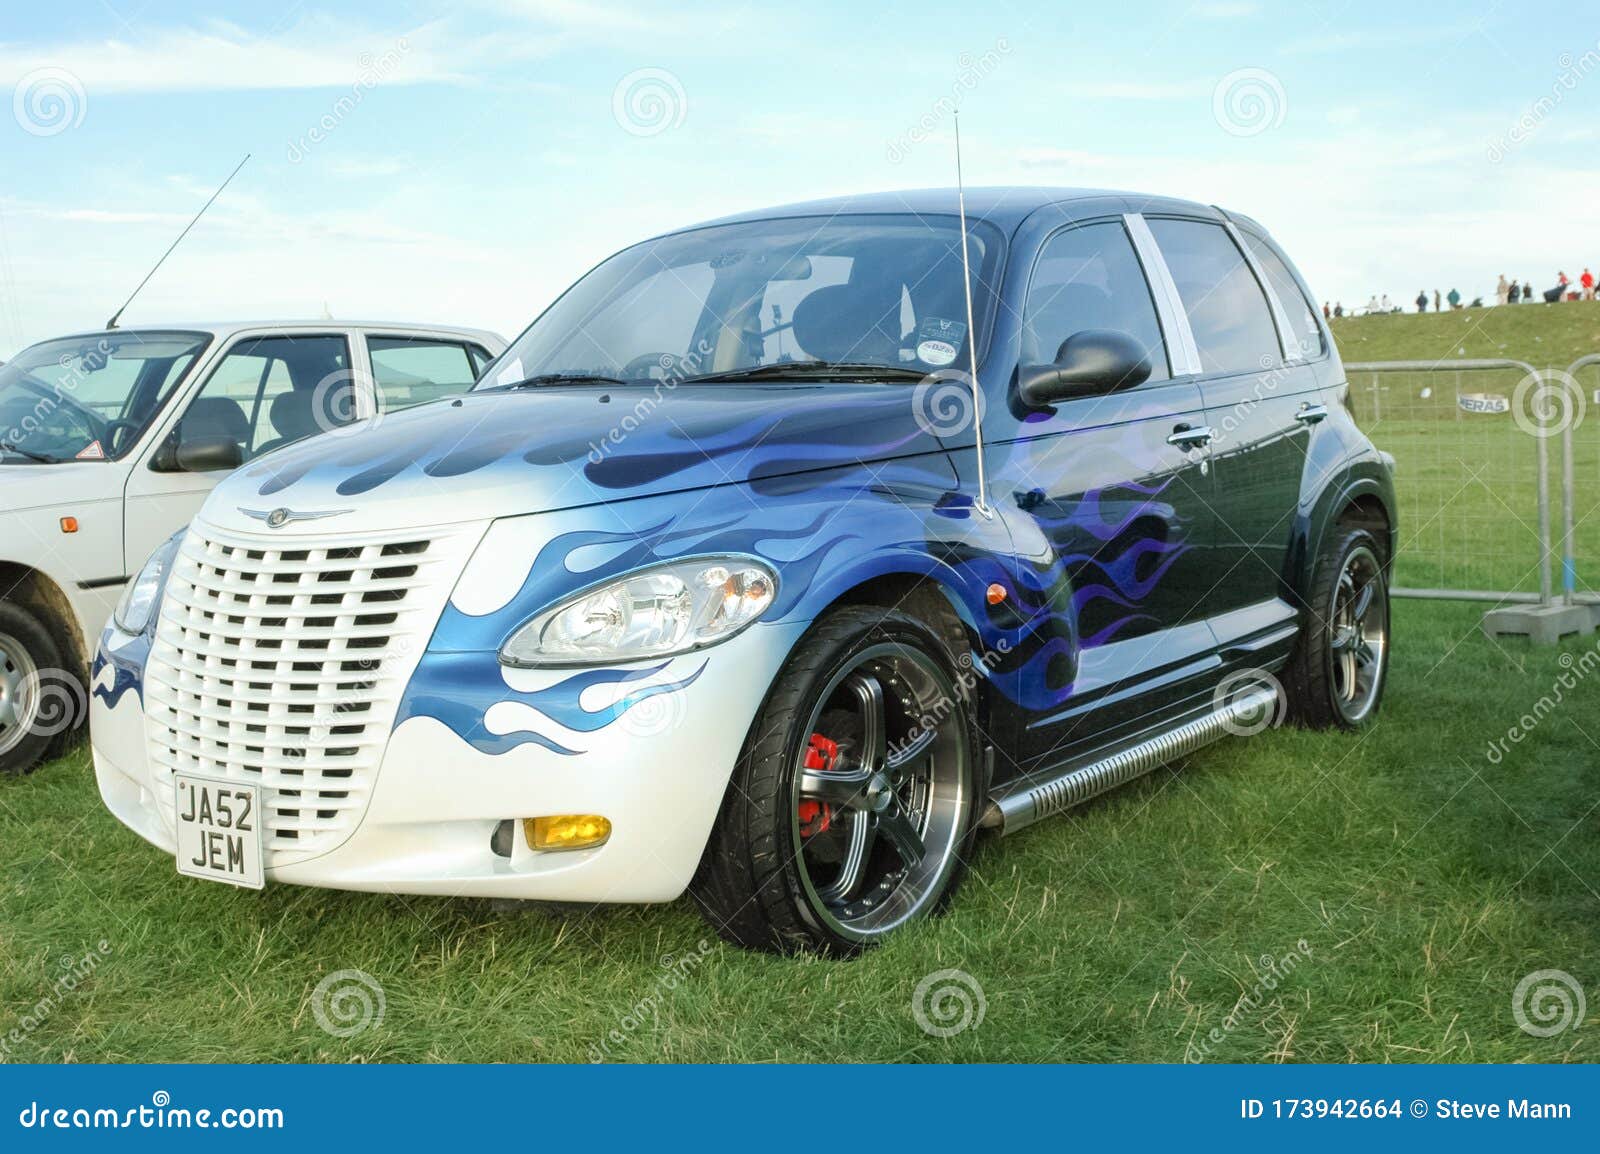 Car tuning style alien, This Alien-themed PT Cruiser was shown at